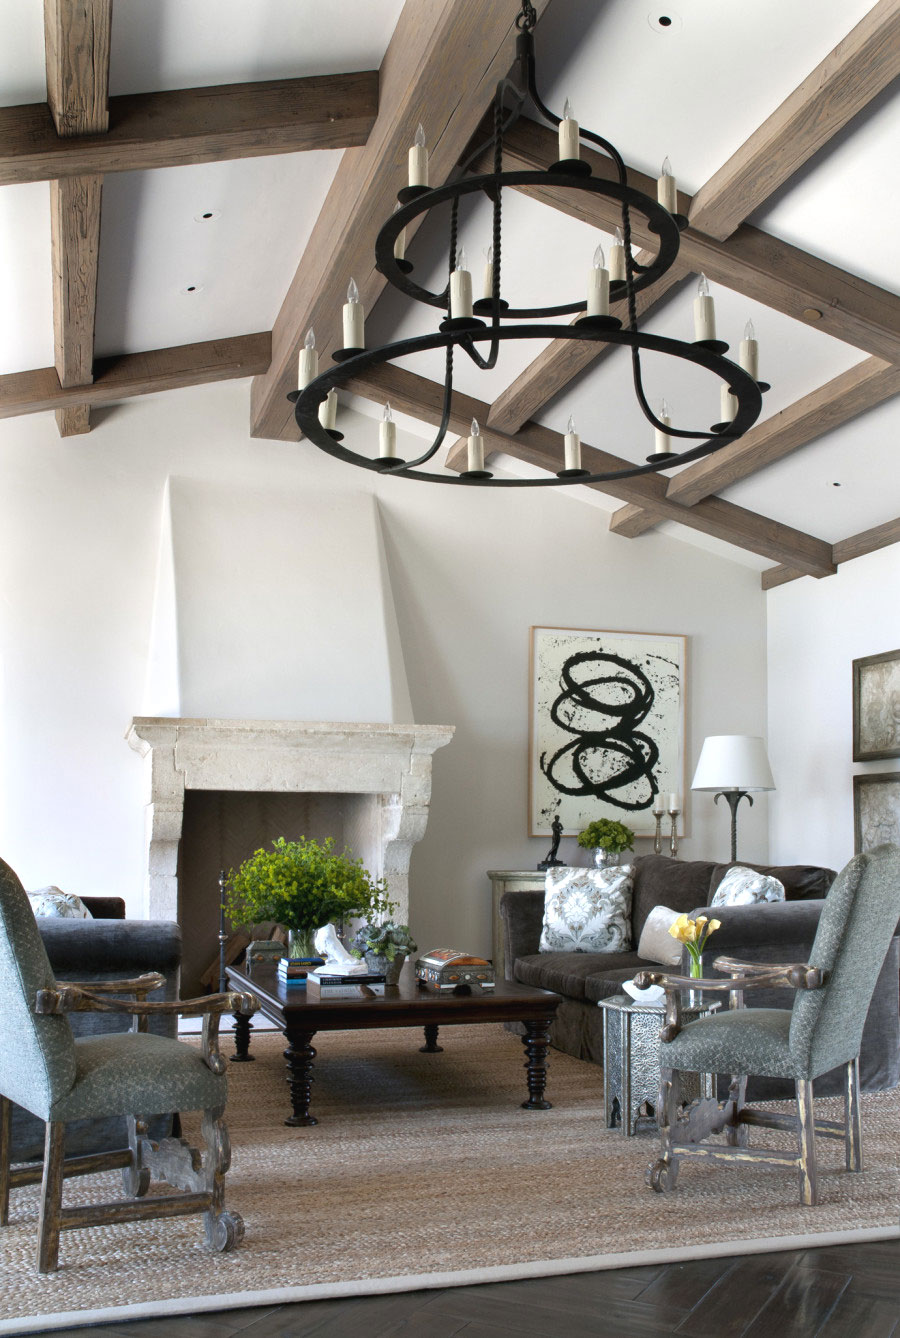 Living room with exposed beams